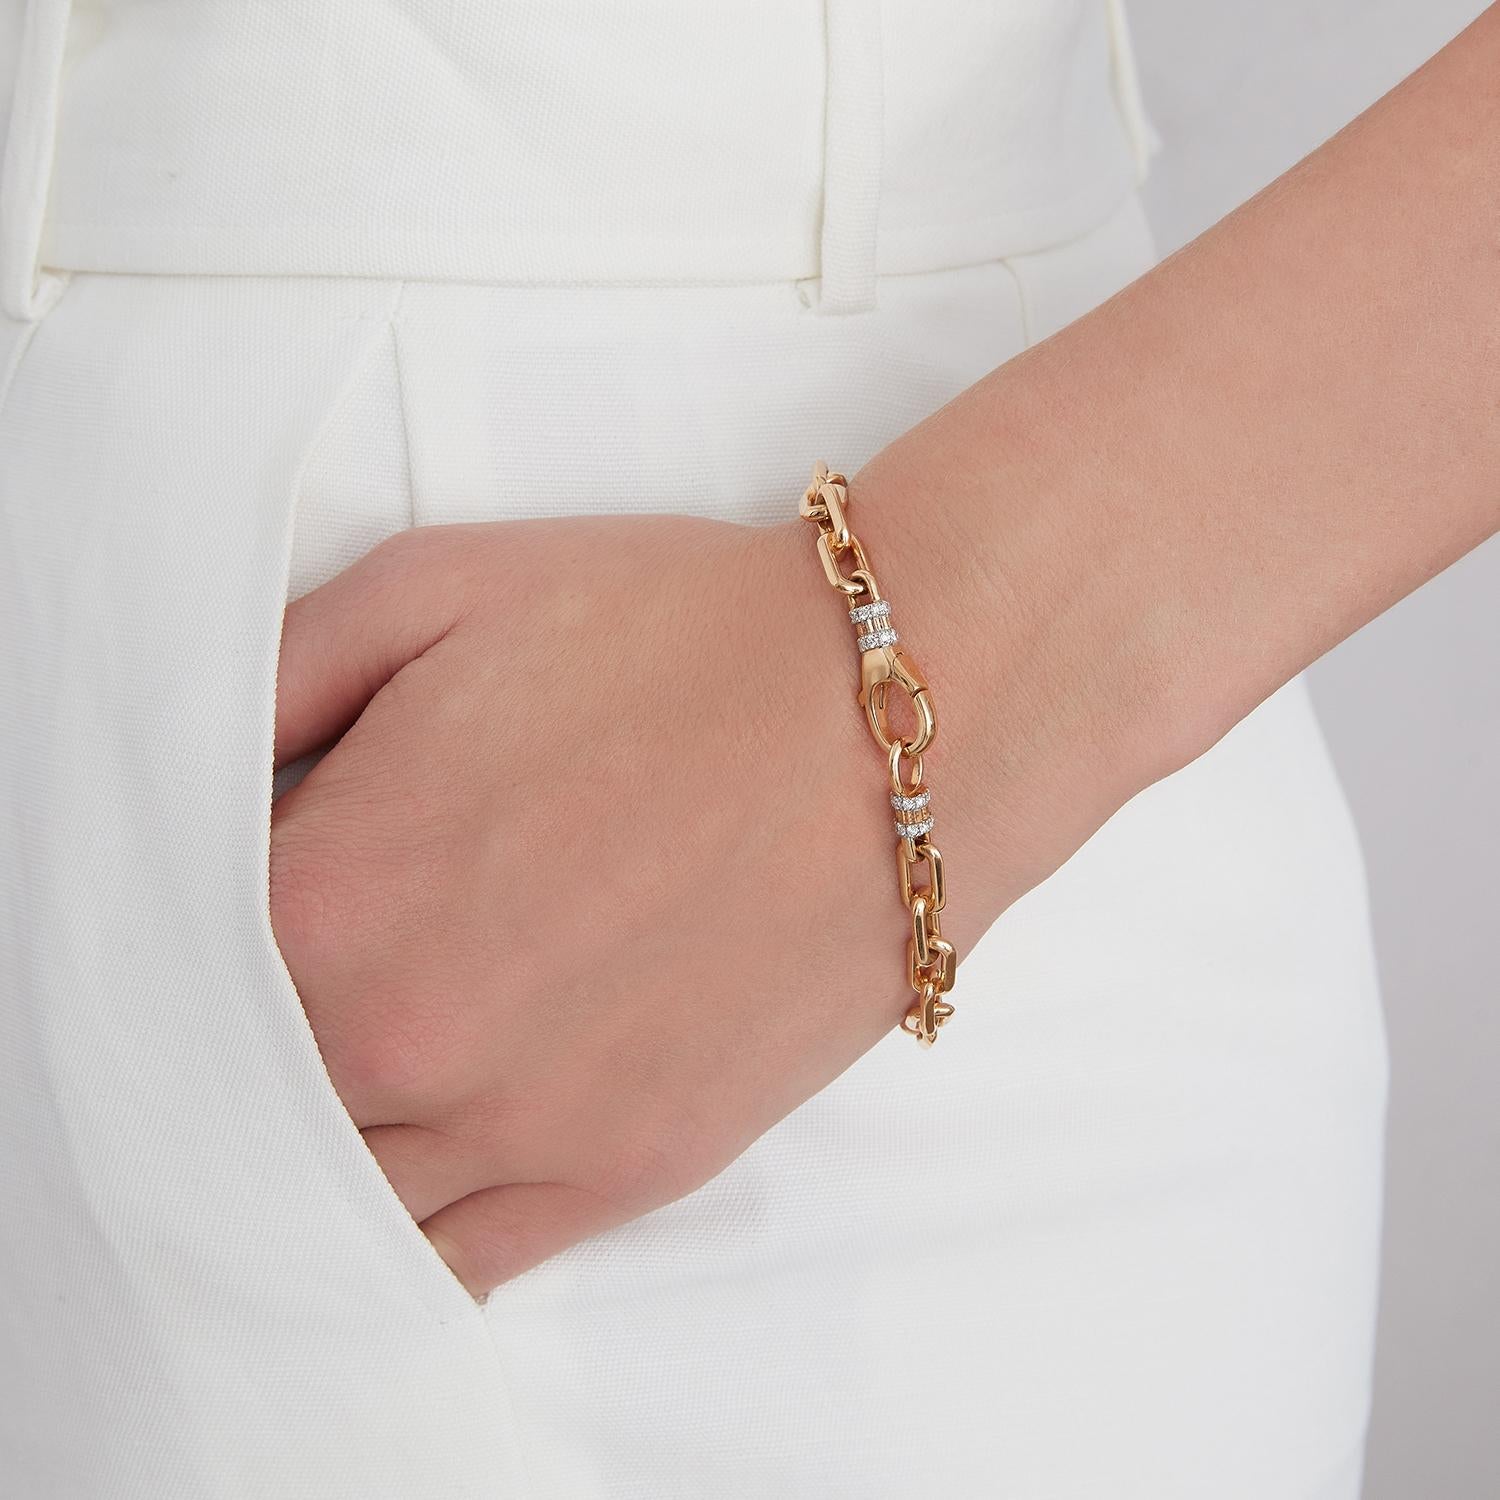 Walters Faith's Clive Collection 18K Rose Gold Chain Link Bracelet with Diamond Lobster Clasp. 0.45 Diamond Carat Weight. Bracelet has 10 double links and fits a 6.5